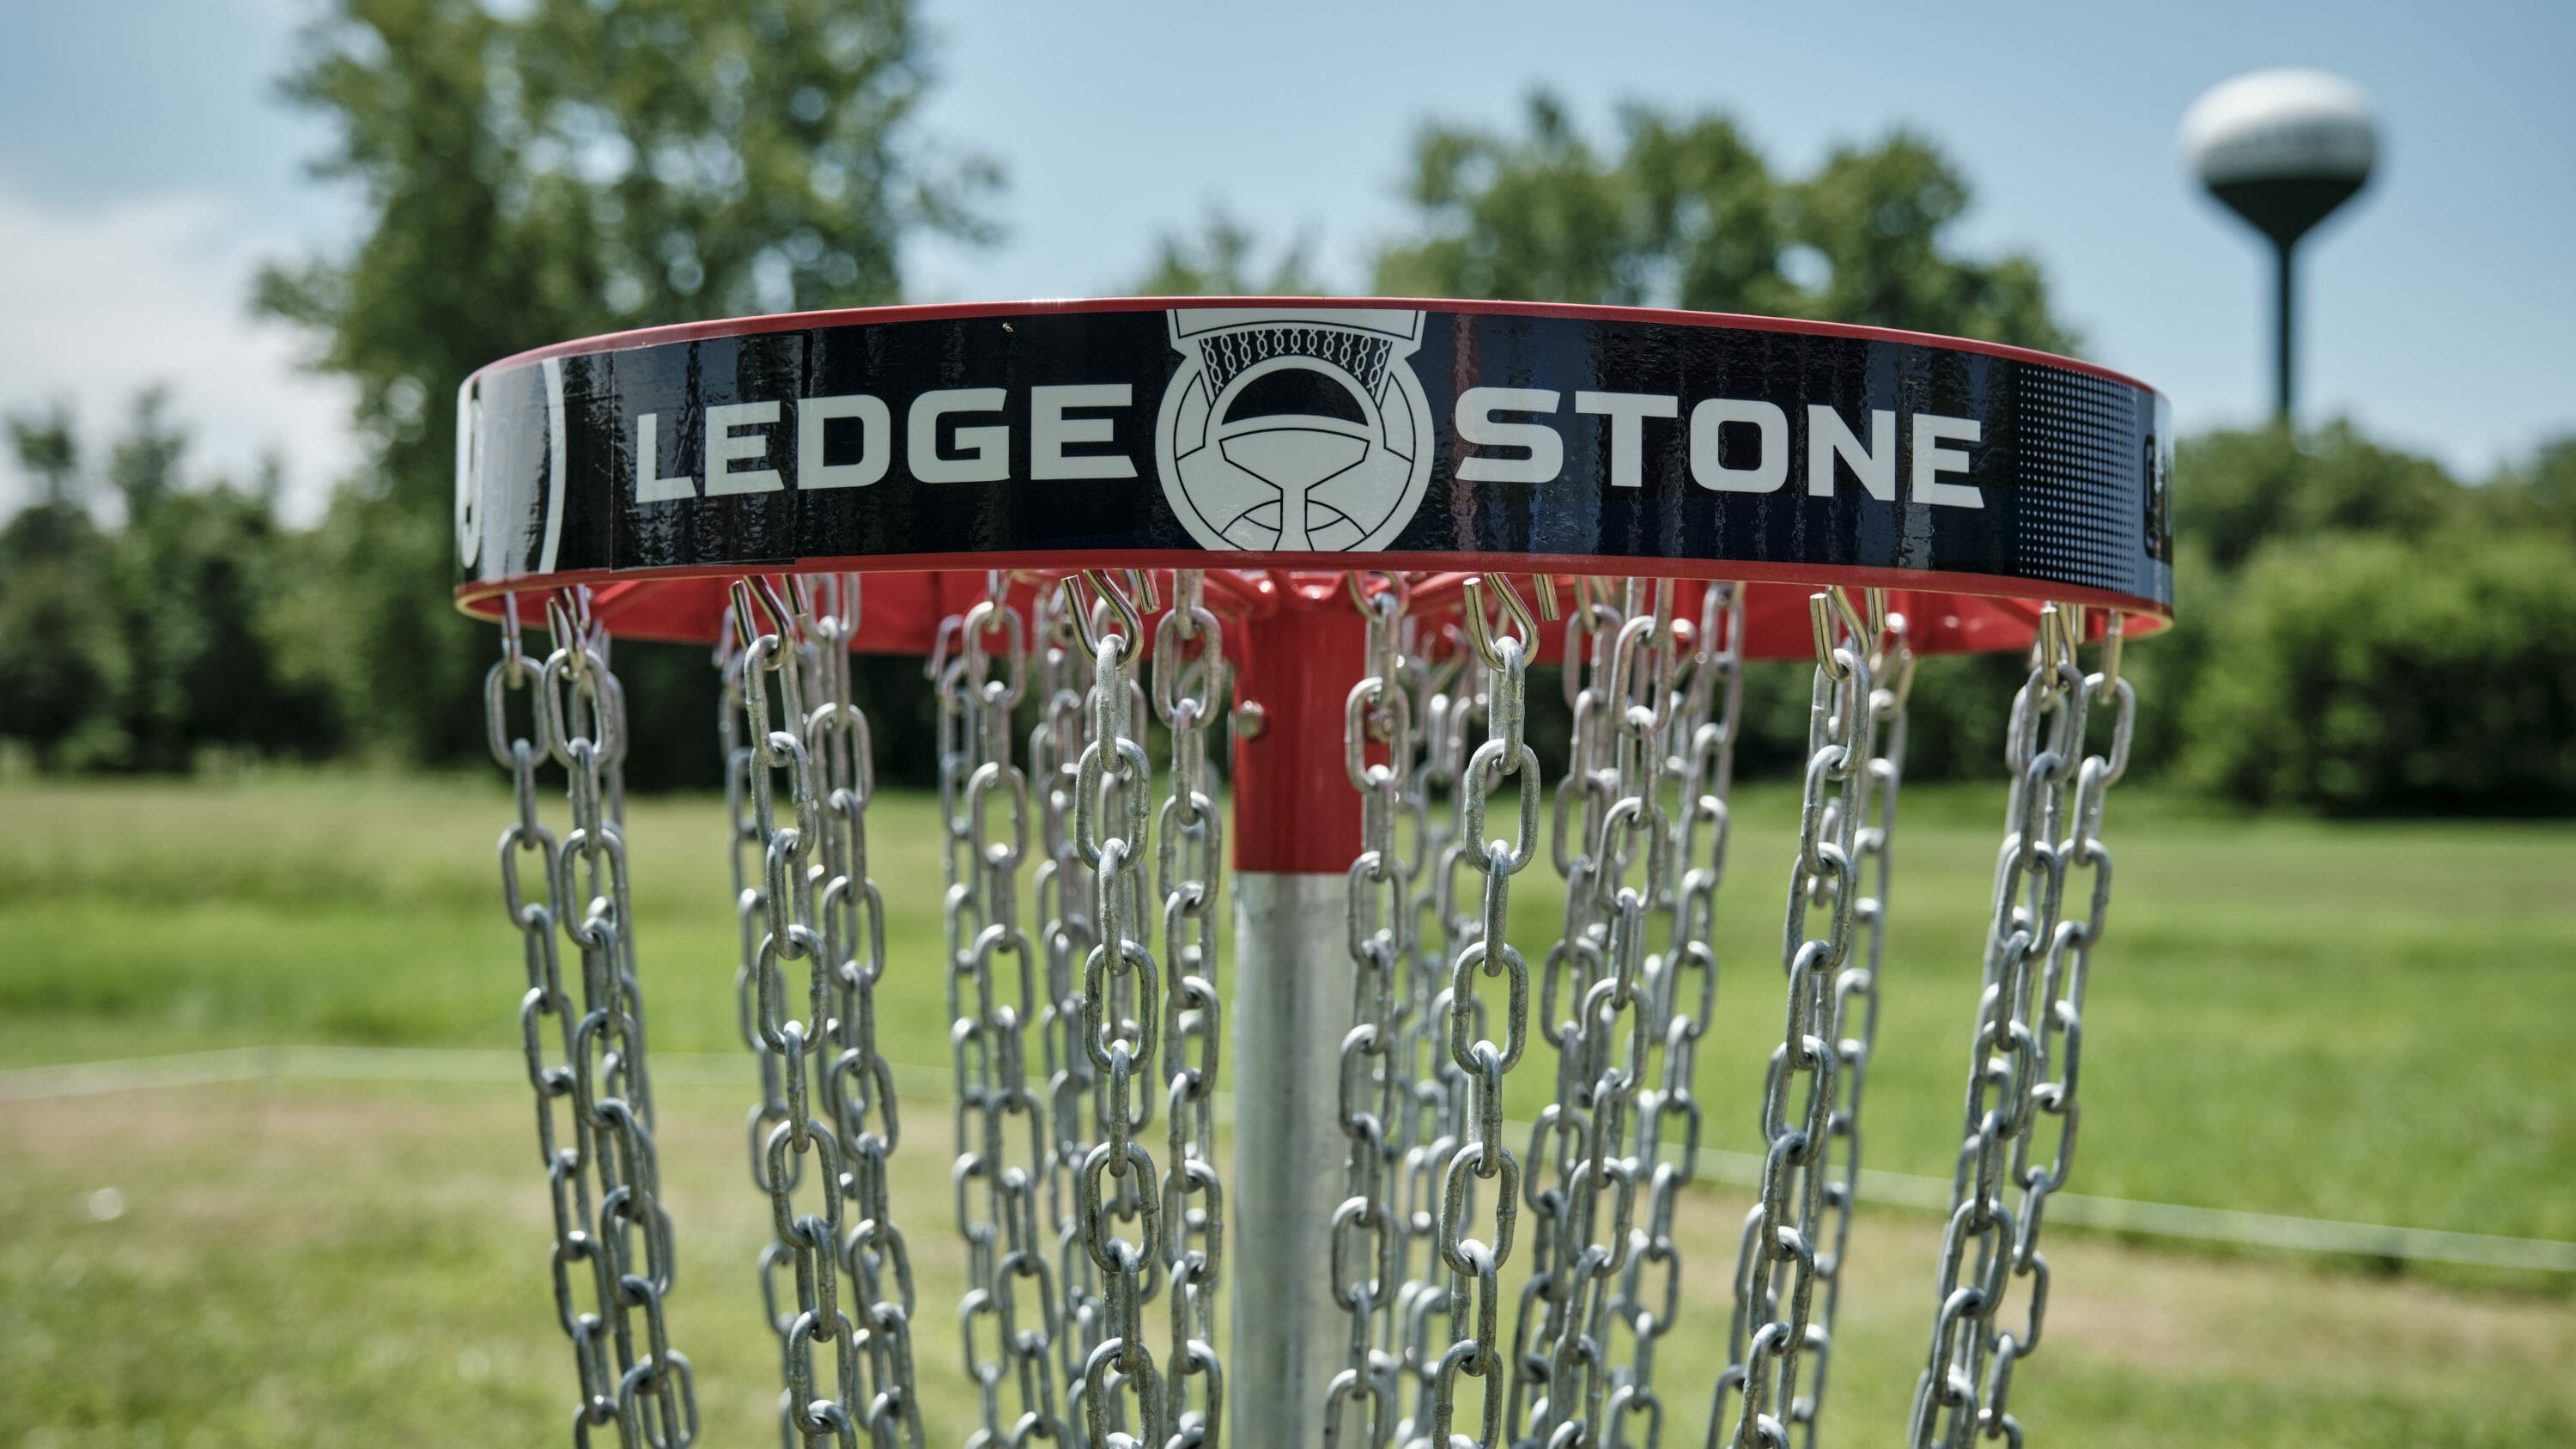 2023 Ledgestone Open: The Final Elite+ Disc Golf Tournament with Record Purse & Top Players